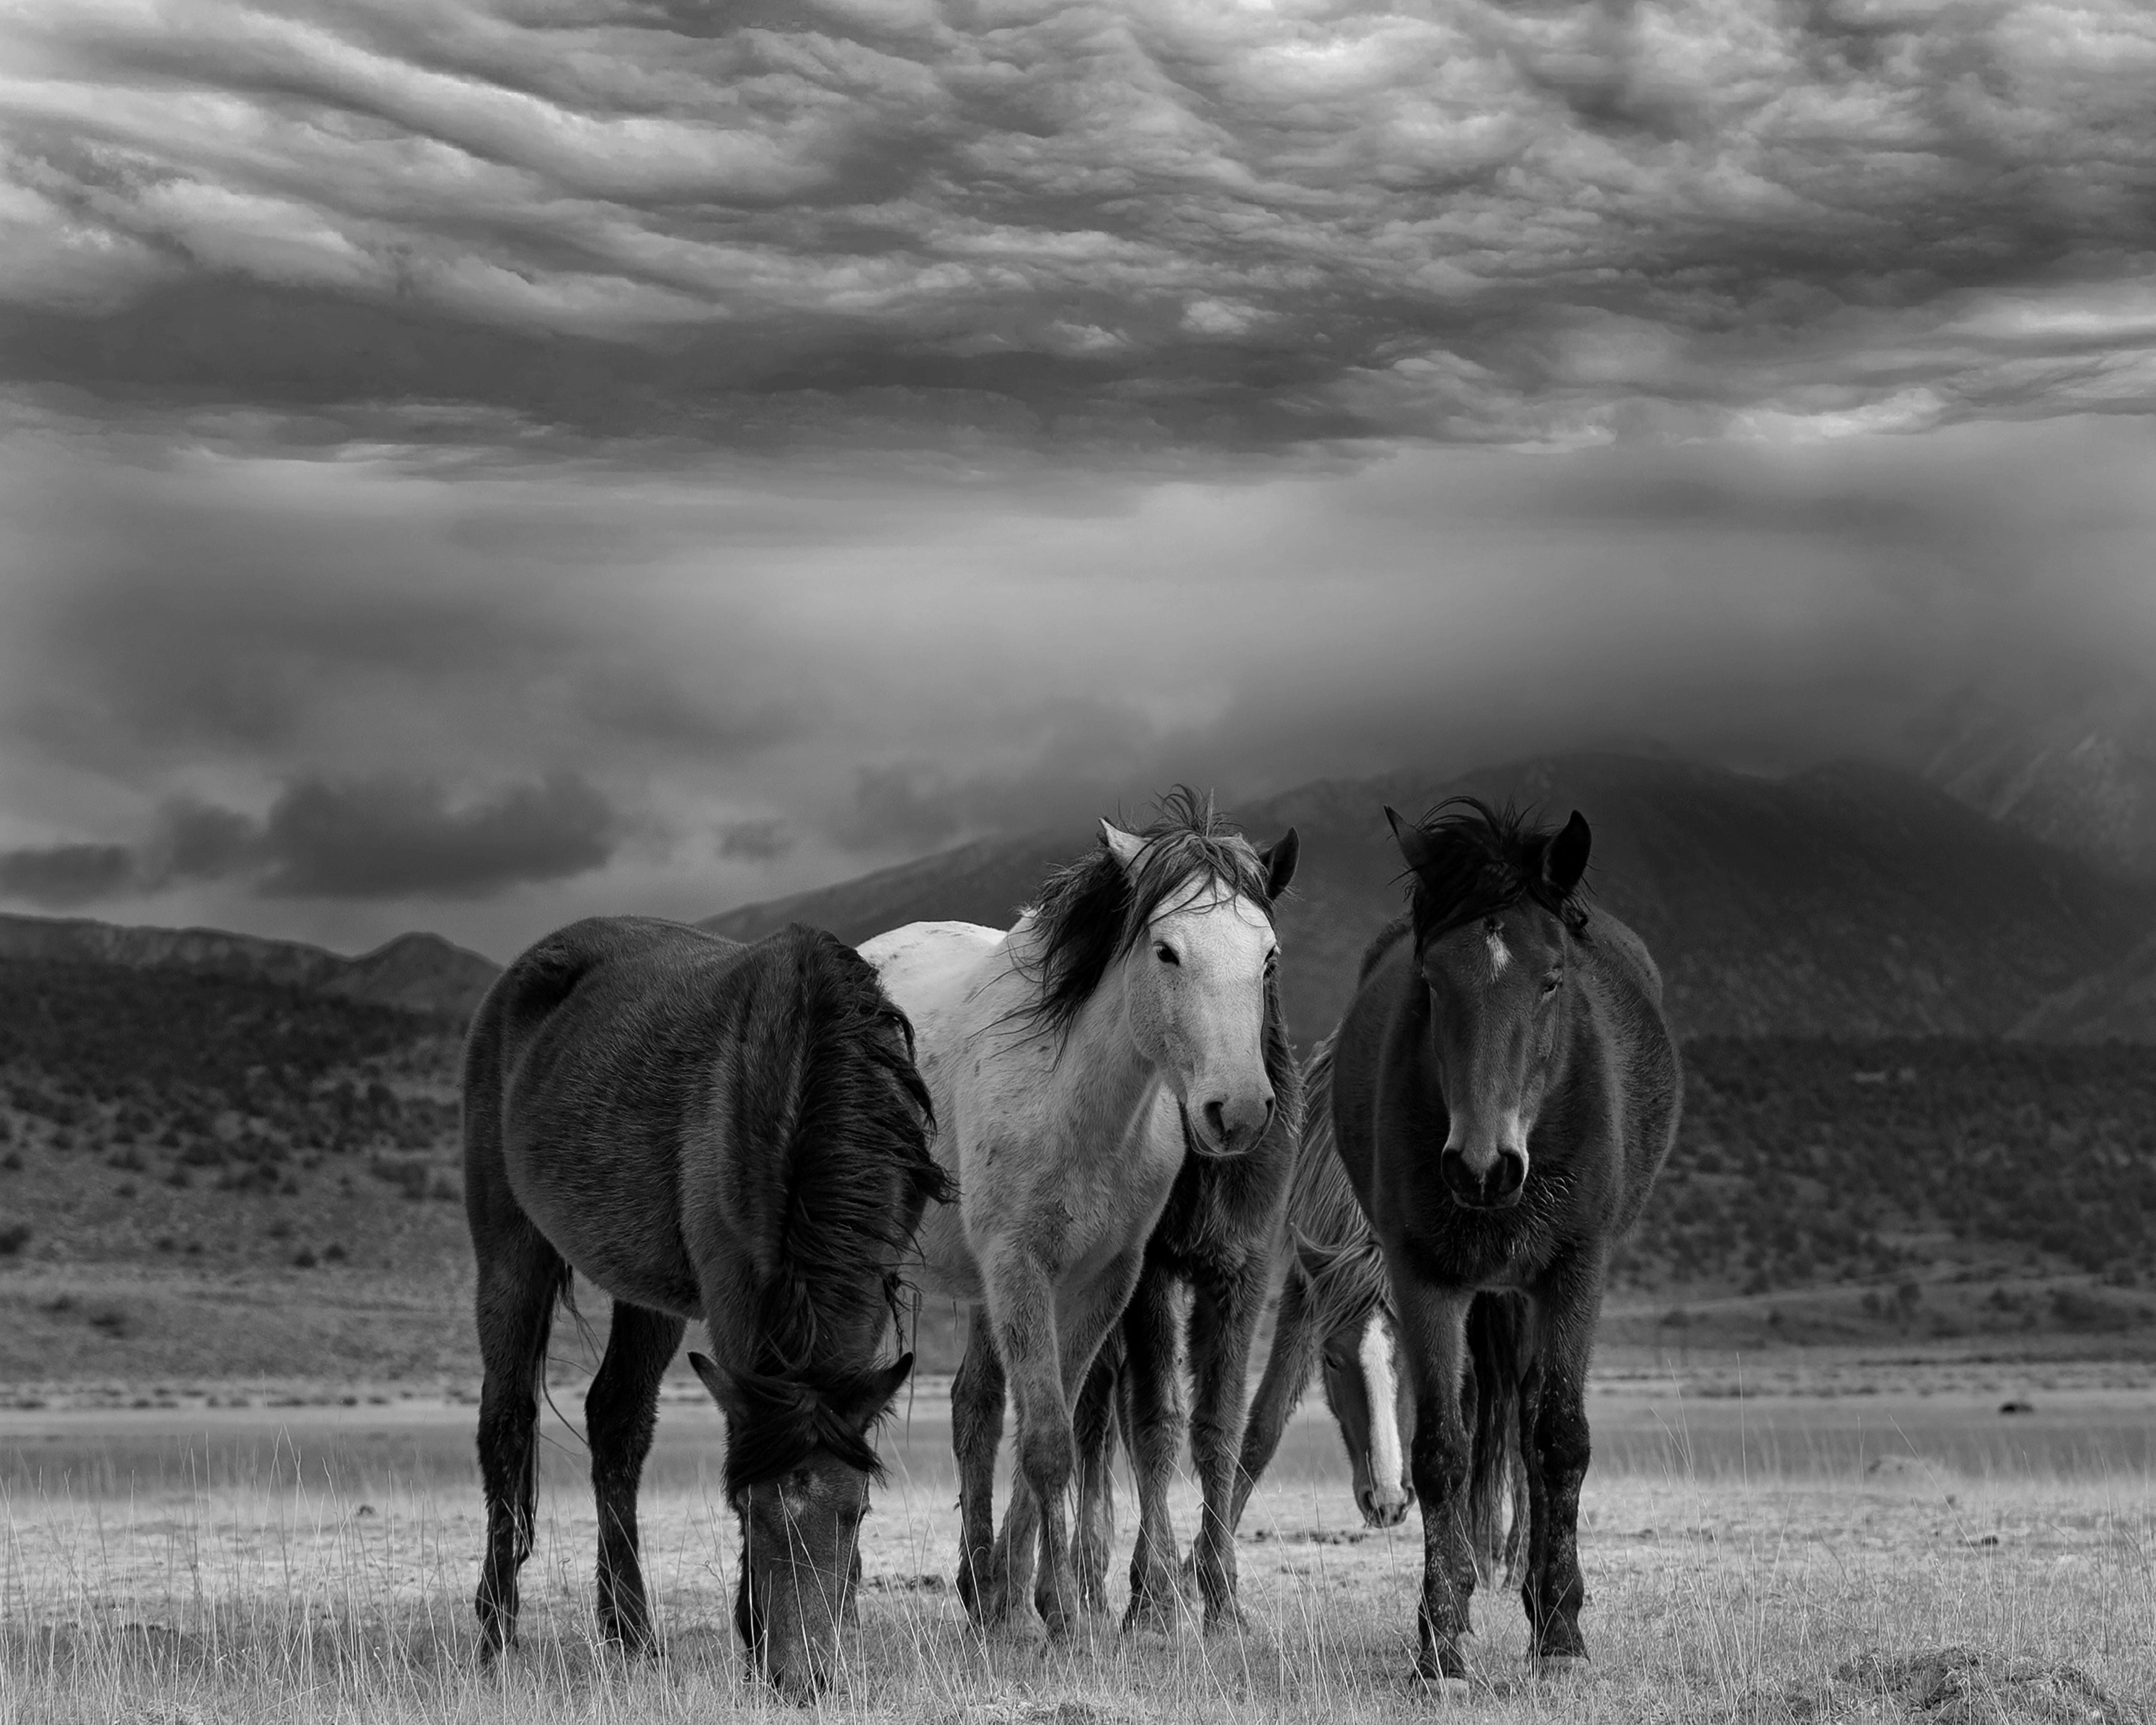 Shane Russeck Animal Print - Black and White Photography Wild Horses "Dust and Horses" 30x40 Mustangs Singed